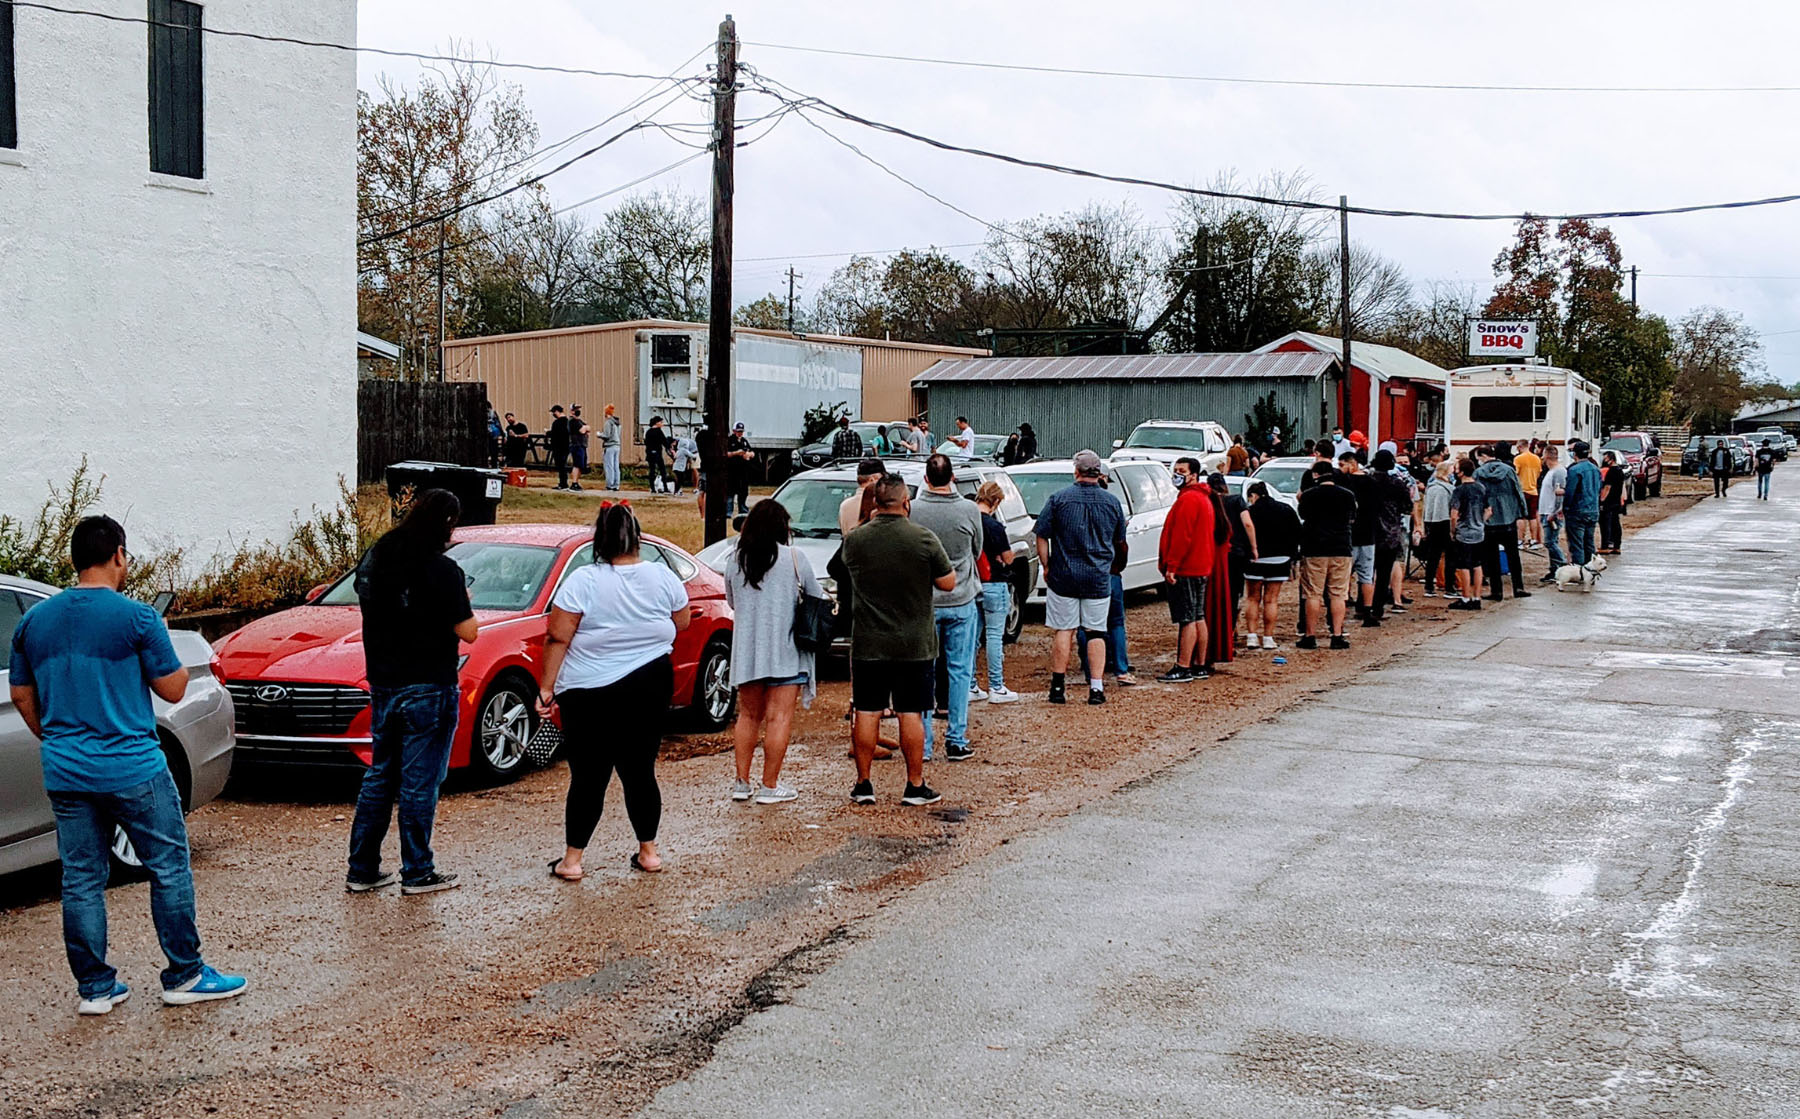 The line of hungry barbecue fans at Snow's BBQ reopening.